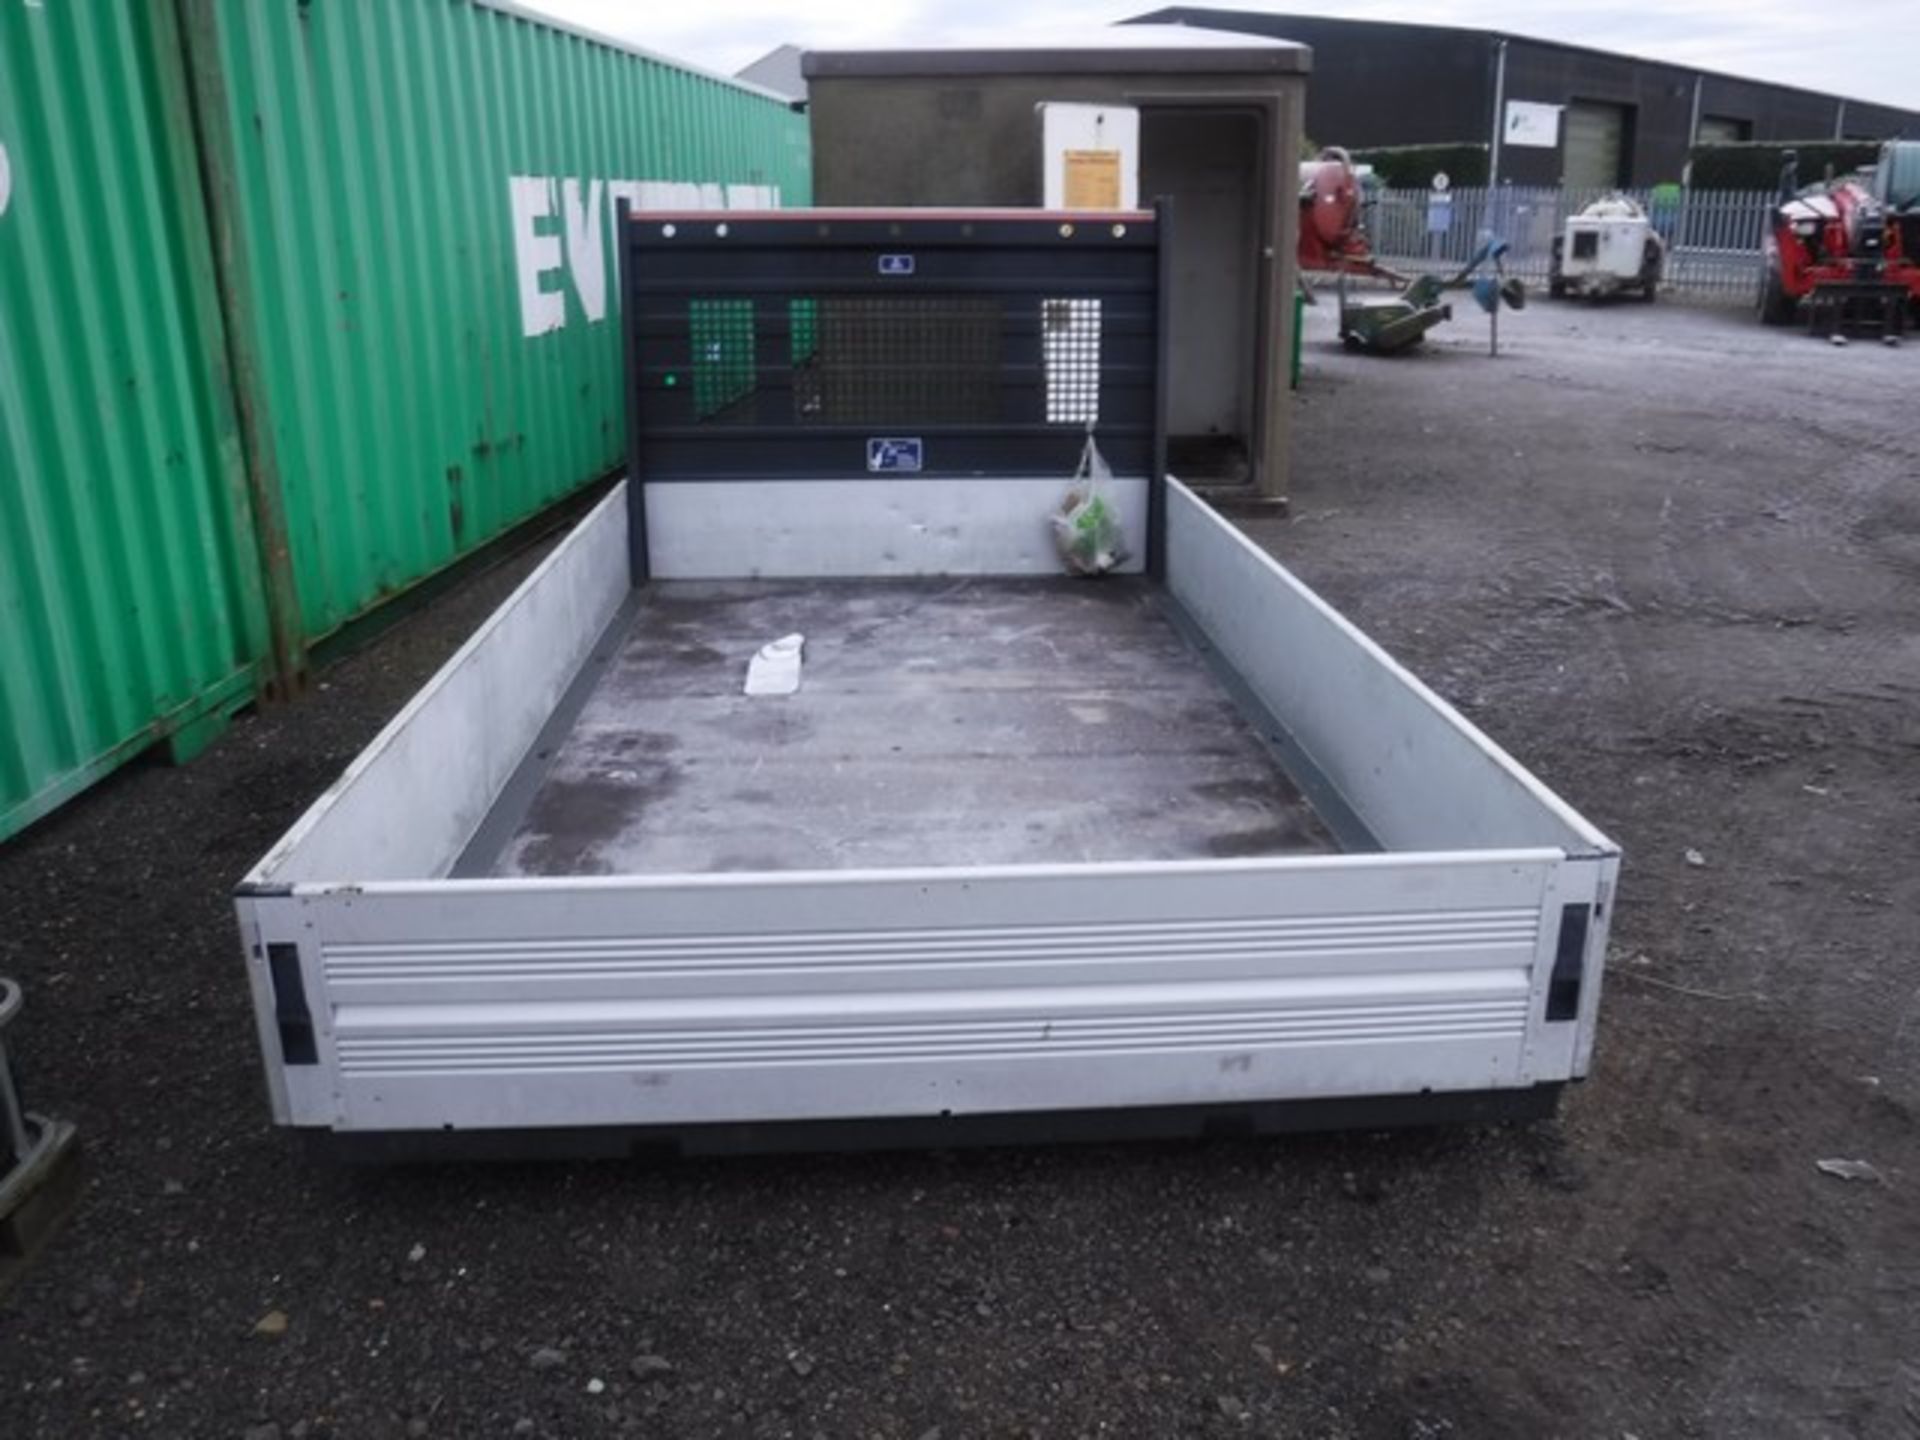 2011 Aluminium dropside pick-up truck body to suit Vauxhall Movano, Renault Master or Nissan NV400 - Image 2 of 3